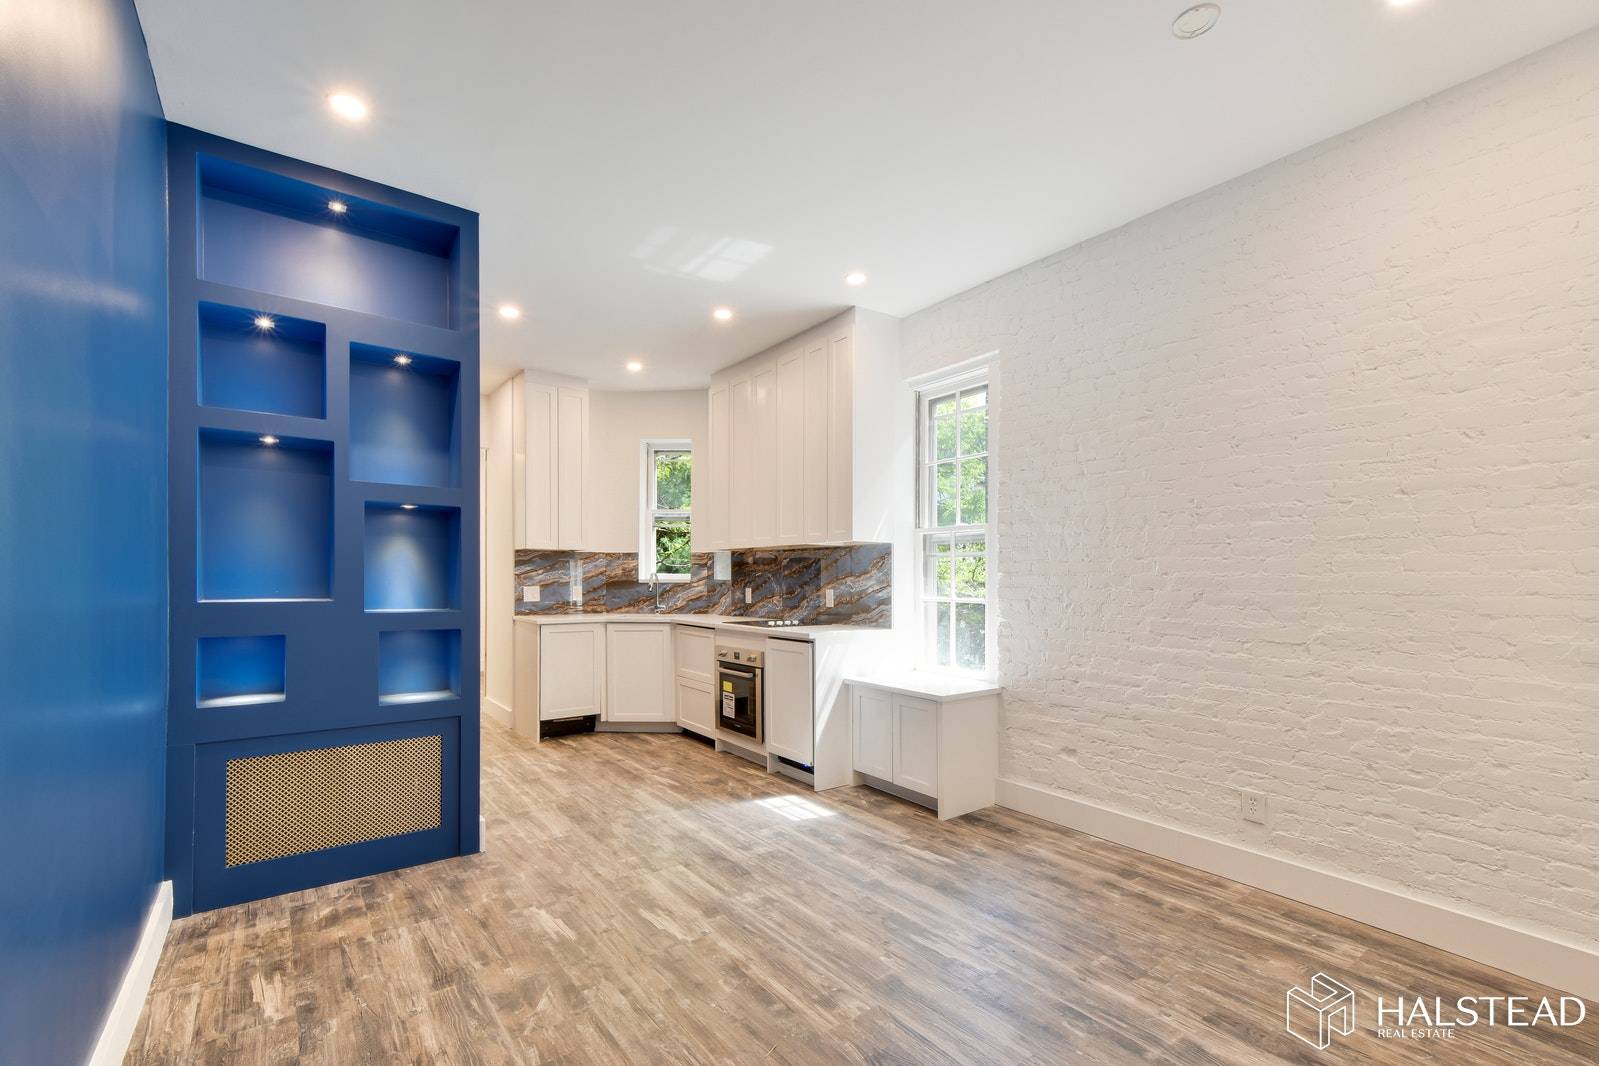 Bring your toothbrush, No stones was left unturned in this completely gut renovated, designer home in of the hottest neighborhoods in all of NYC.